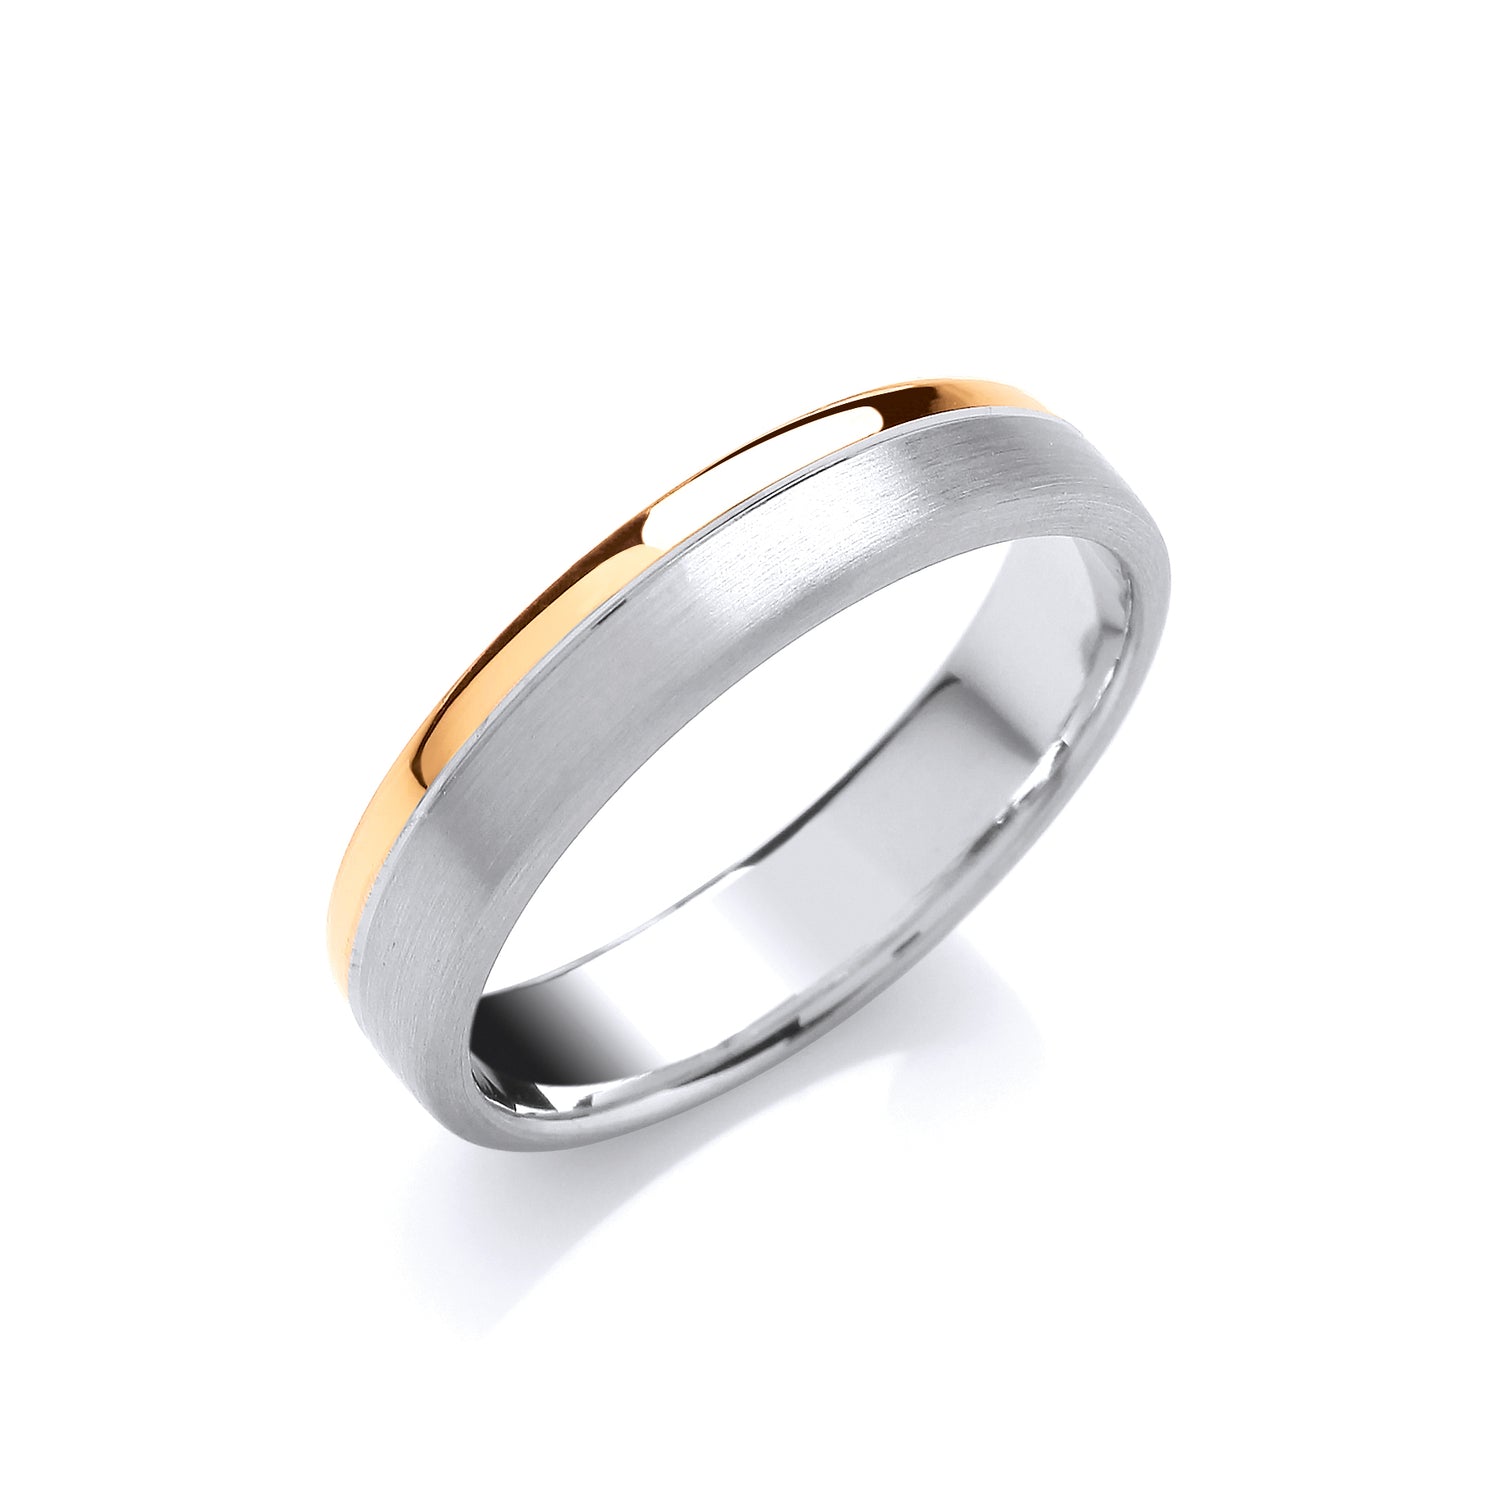 5mm 9CT Two Colour Matte and Polished Finish Wedding Band